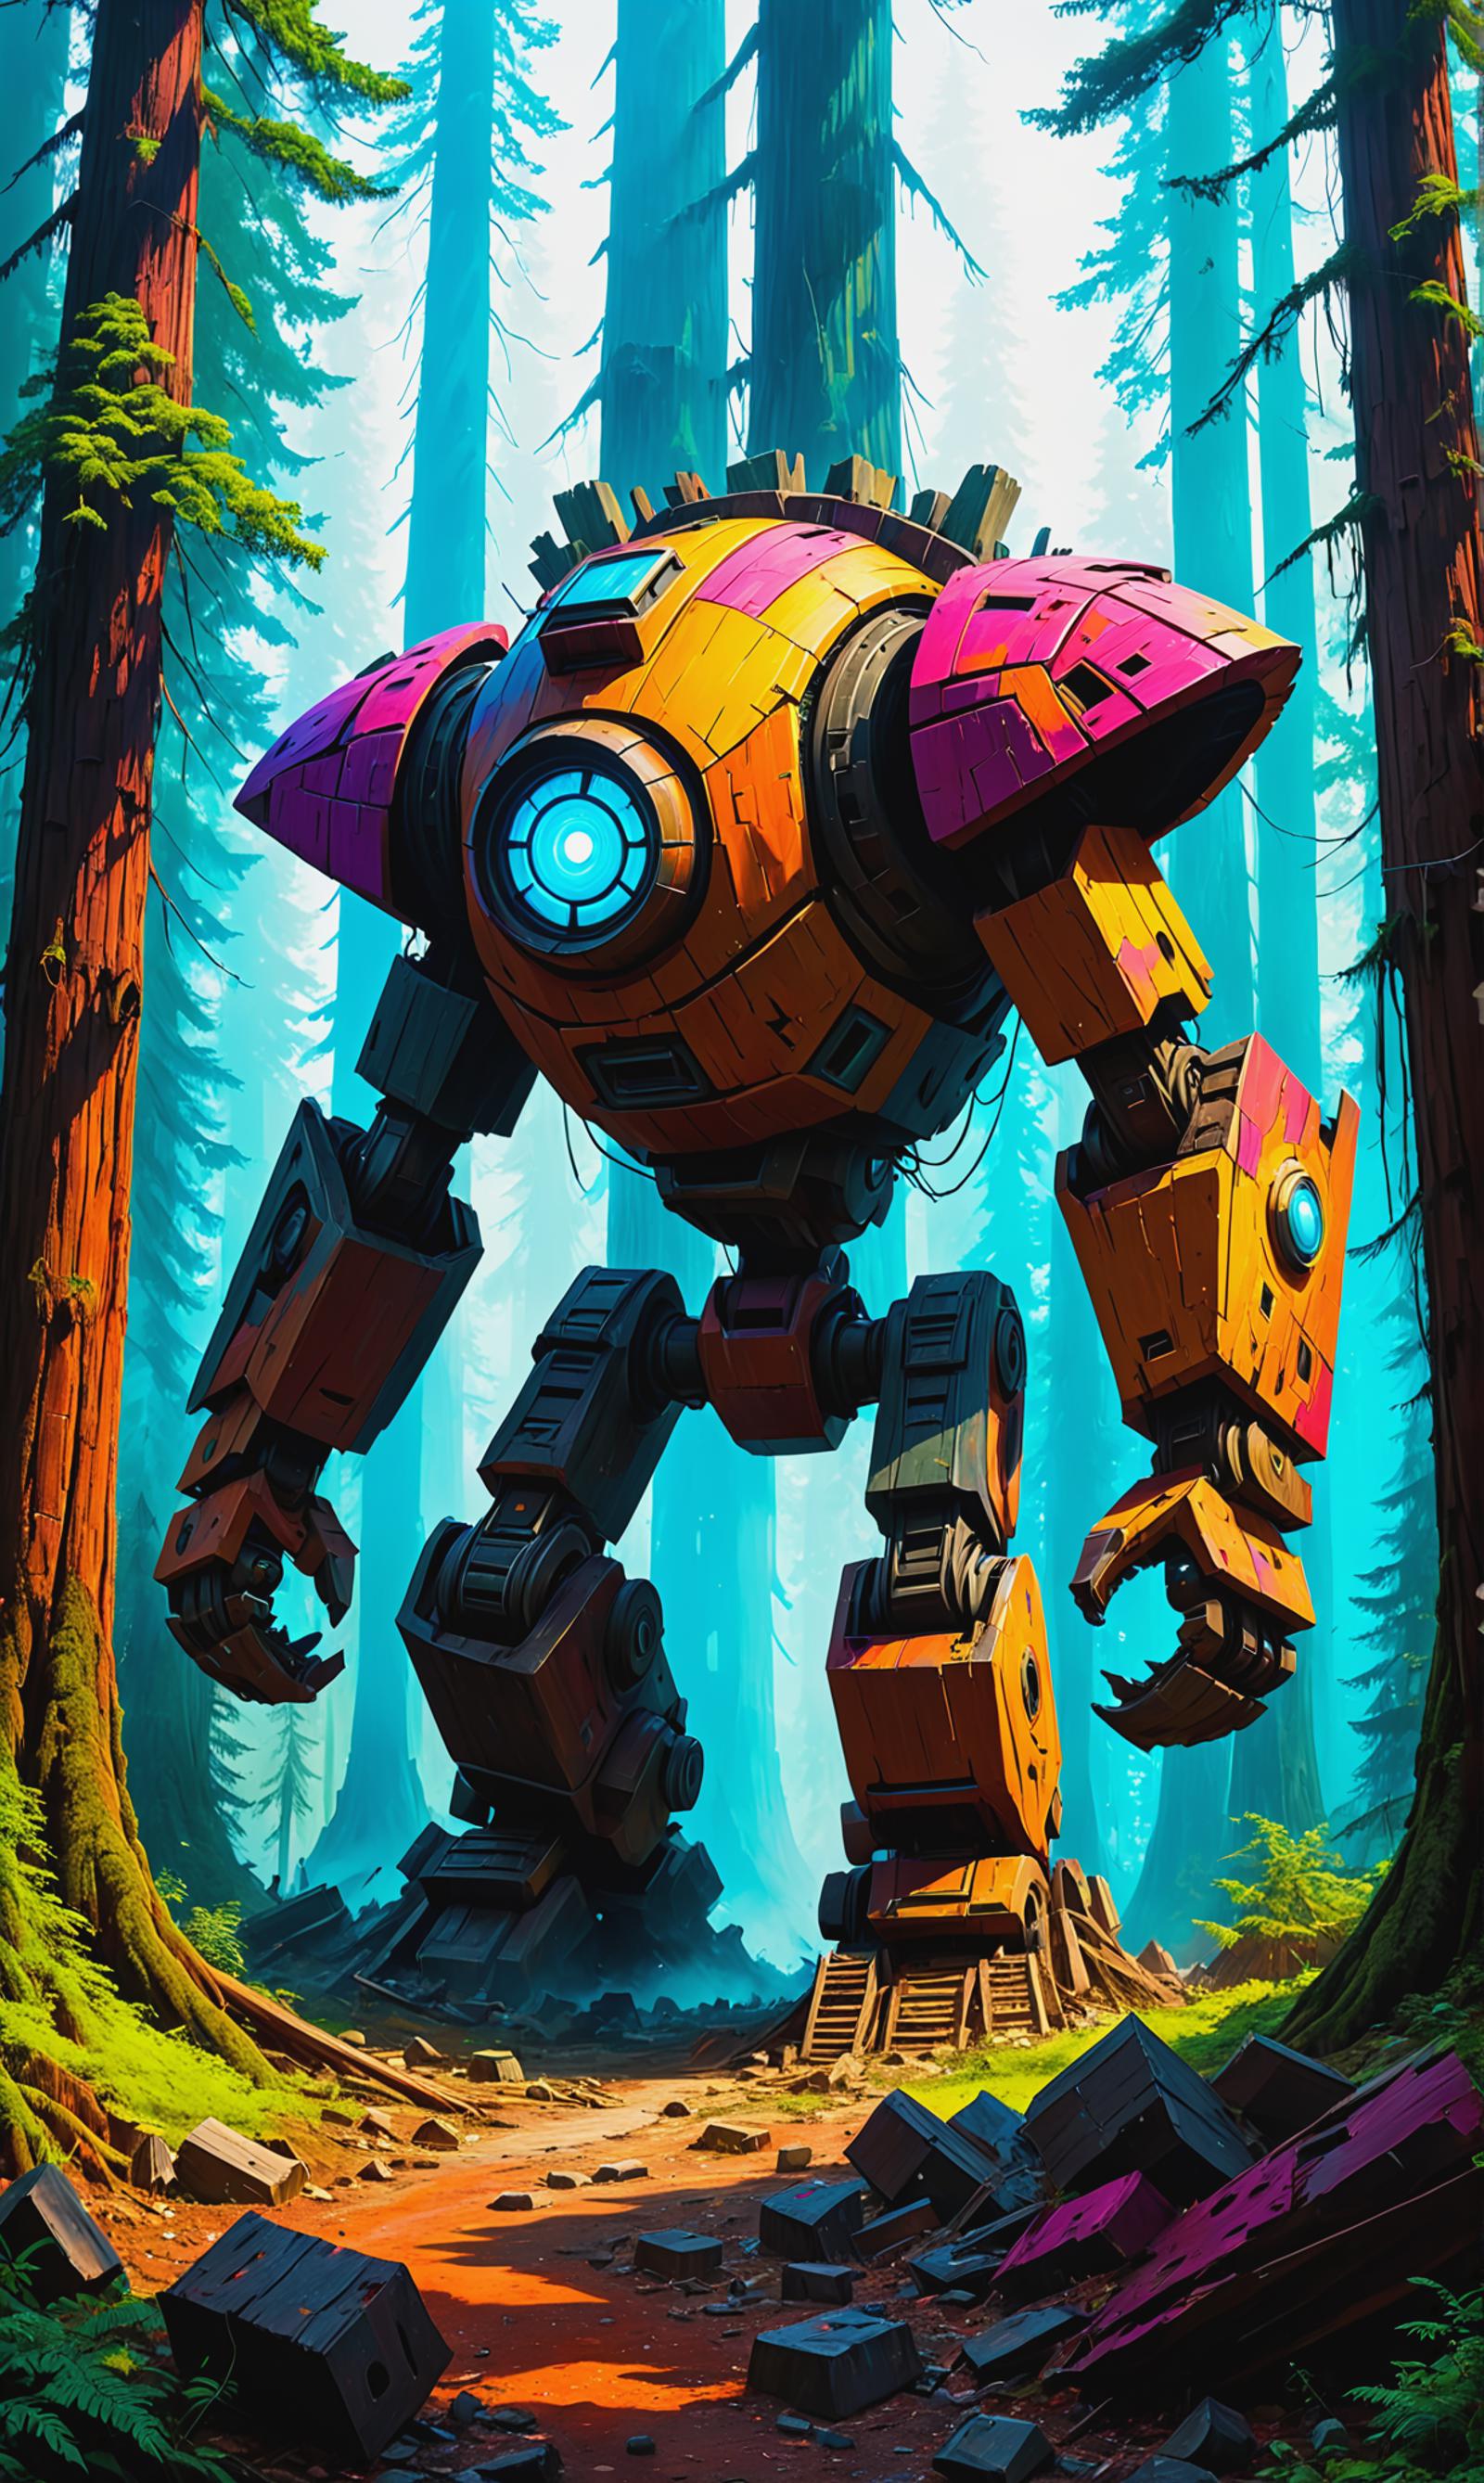 A Large Robotic Machine with Many Arms in a Forest Scene